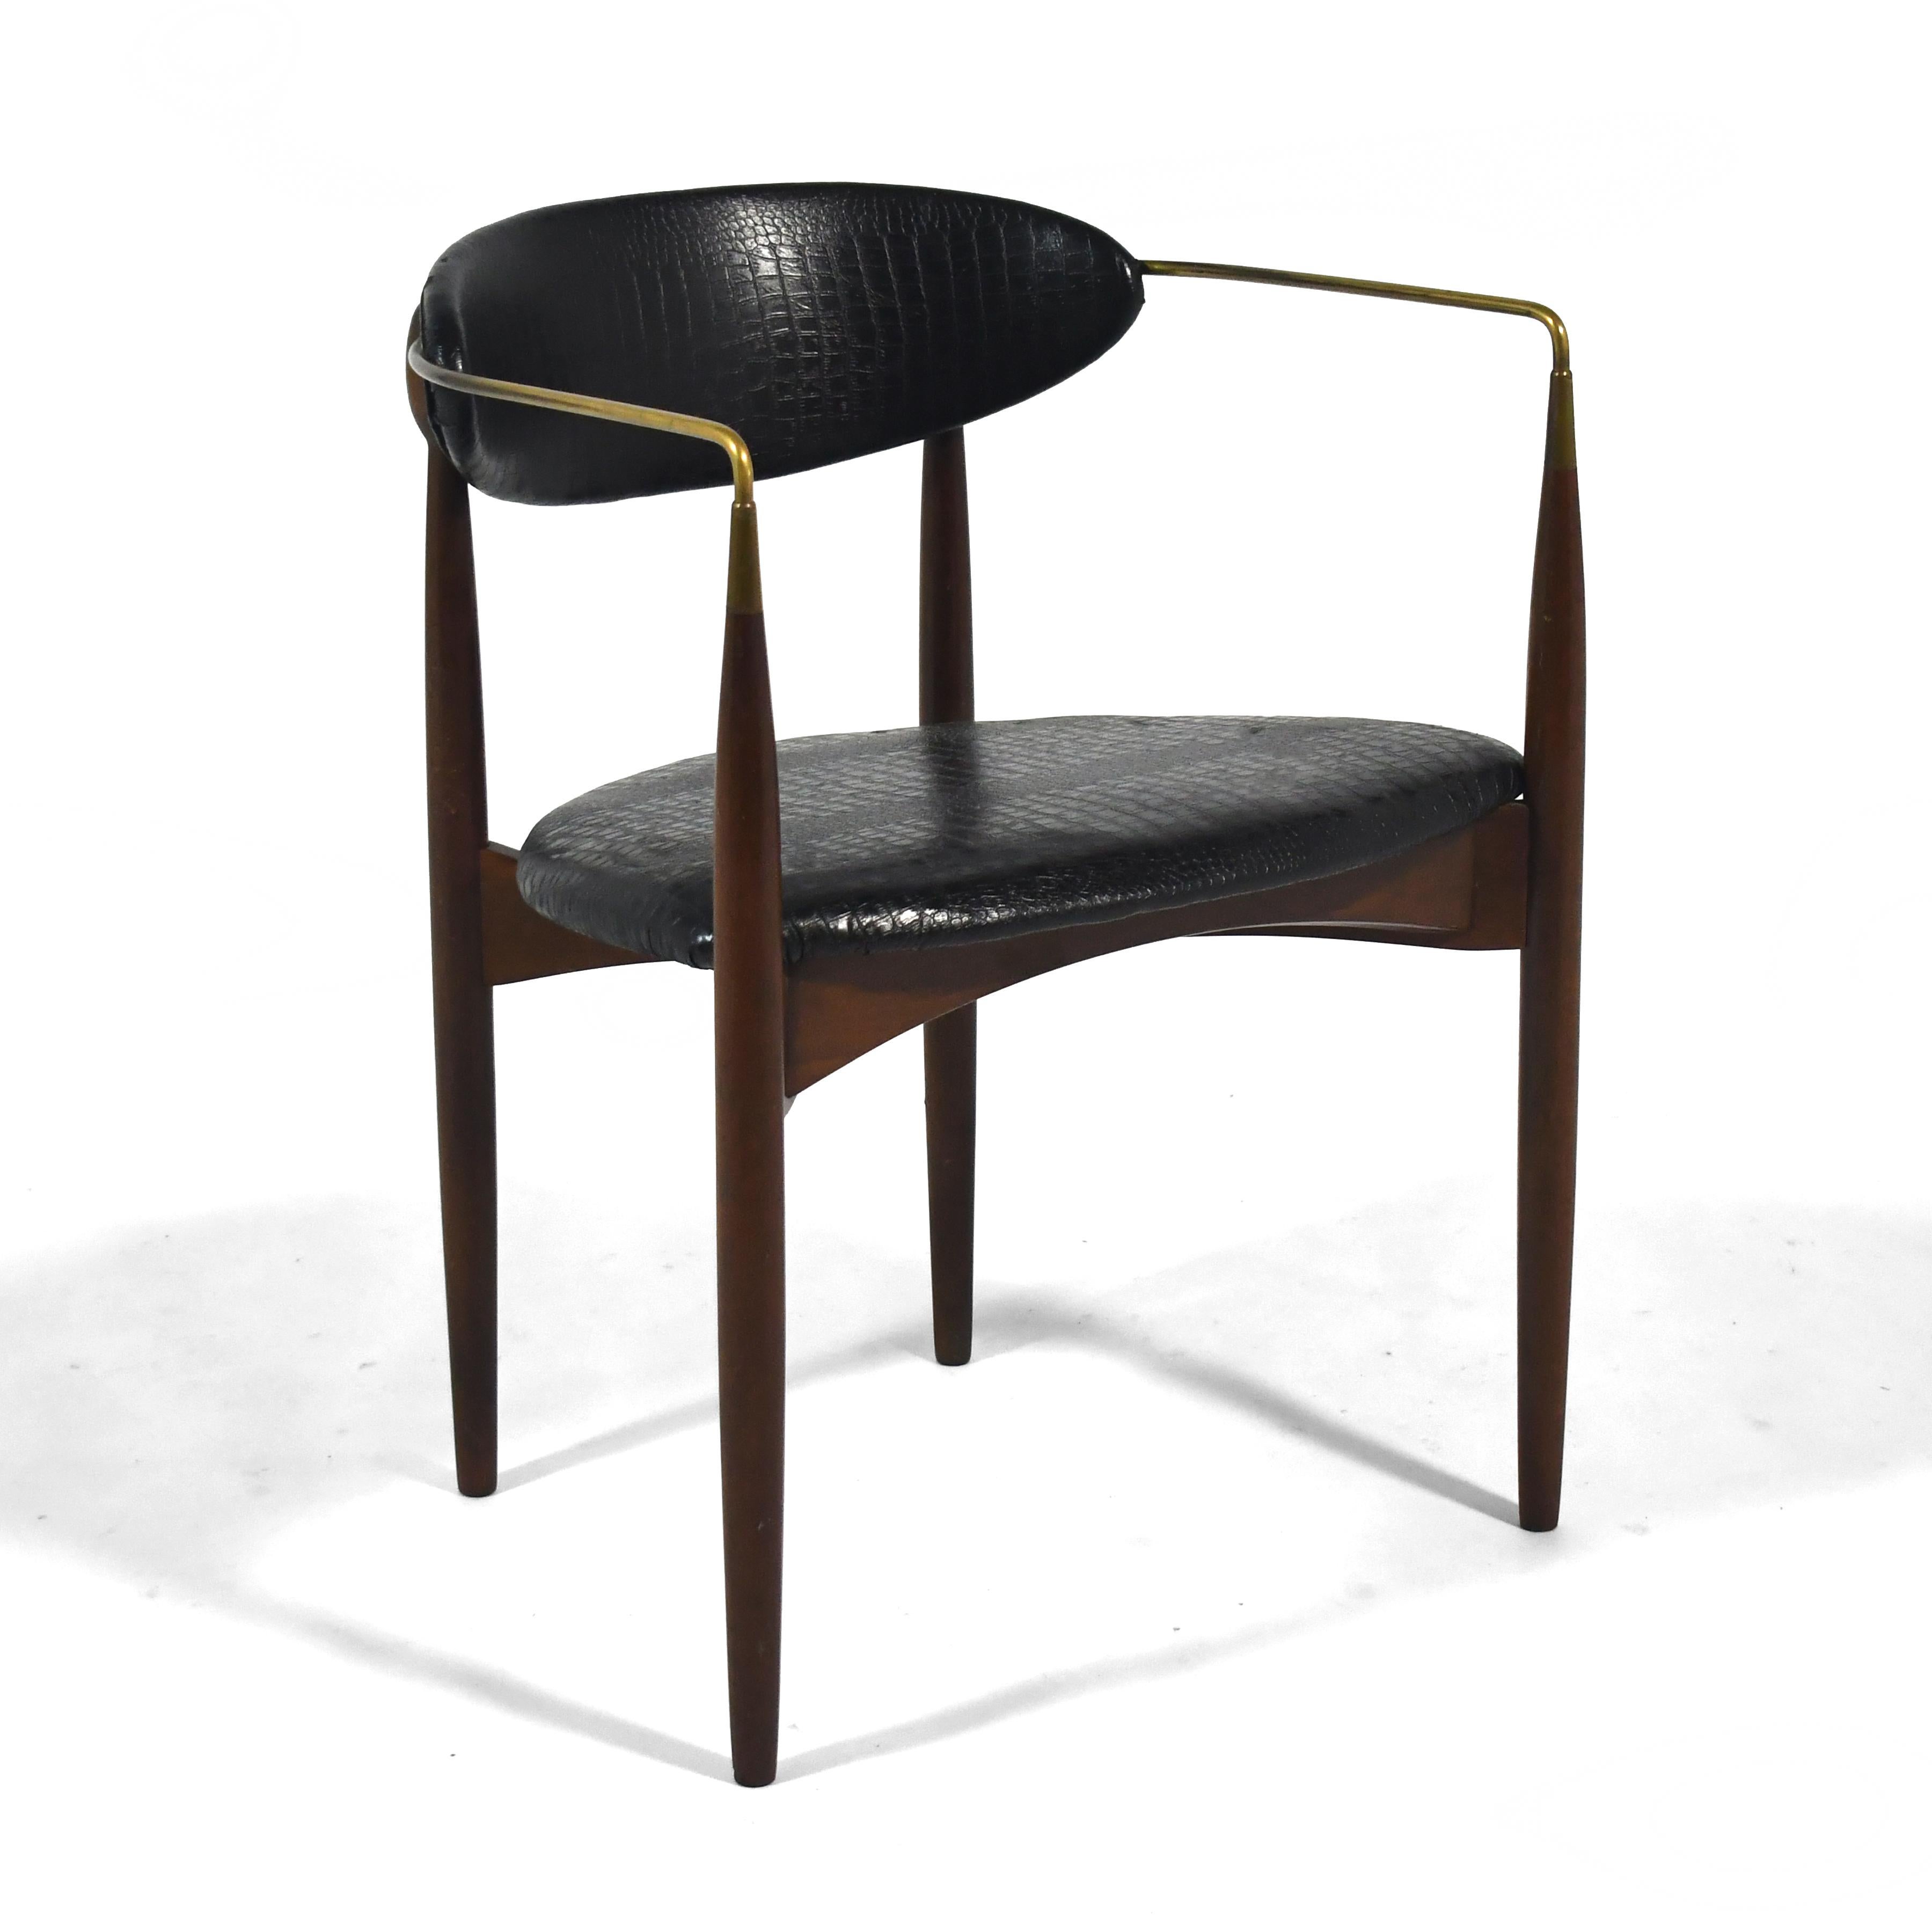 Often incorrectly attributed to Danish designer Ib Kofod-Larsen, these elegant chairs are an early design by American architect Dan Johnson. They were produced and distributed by Selig in the US. Like his famous Gazelle chair, this design is light,